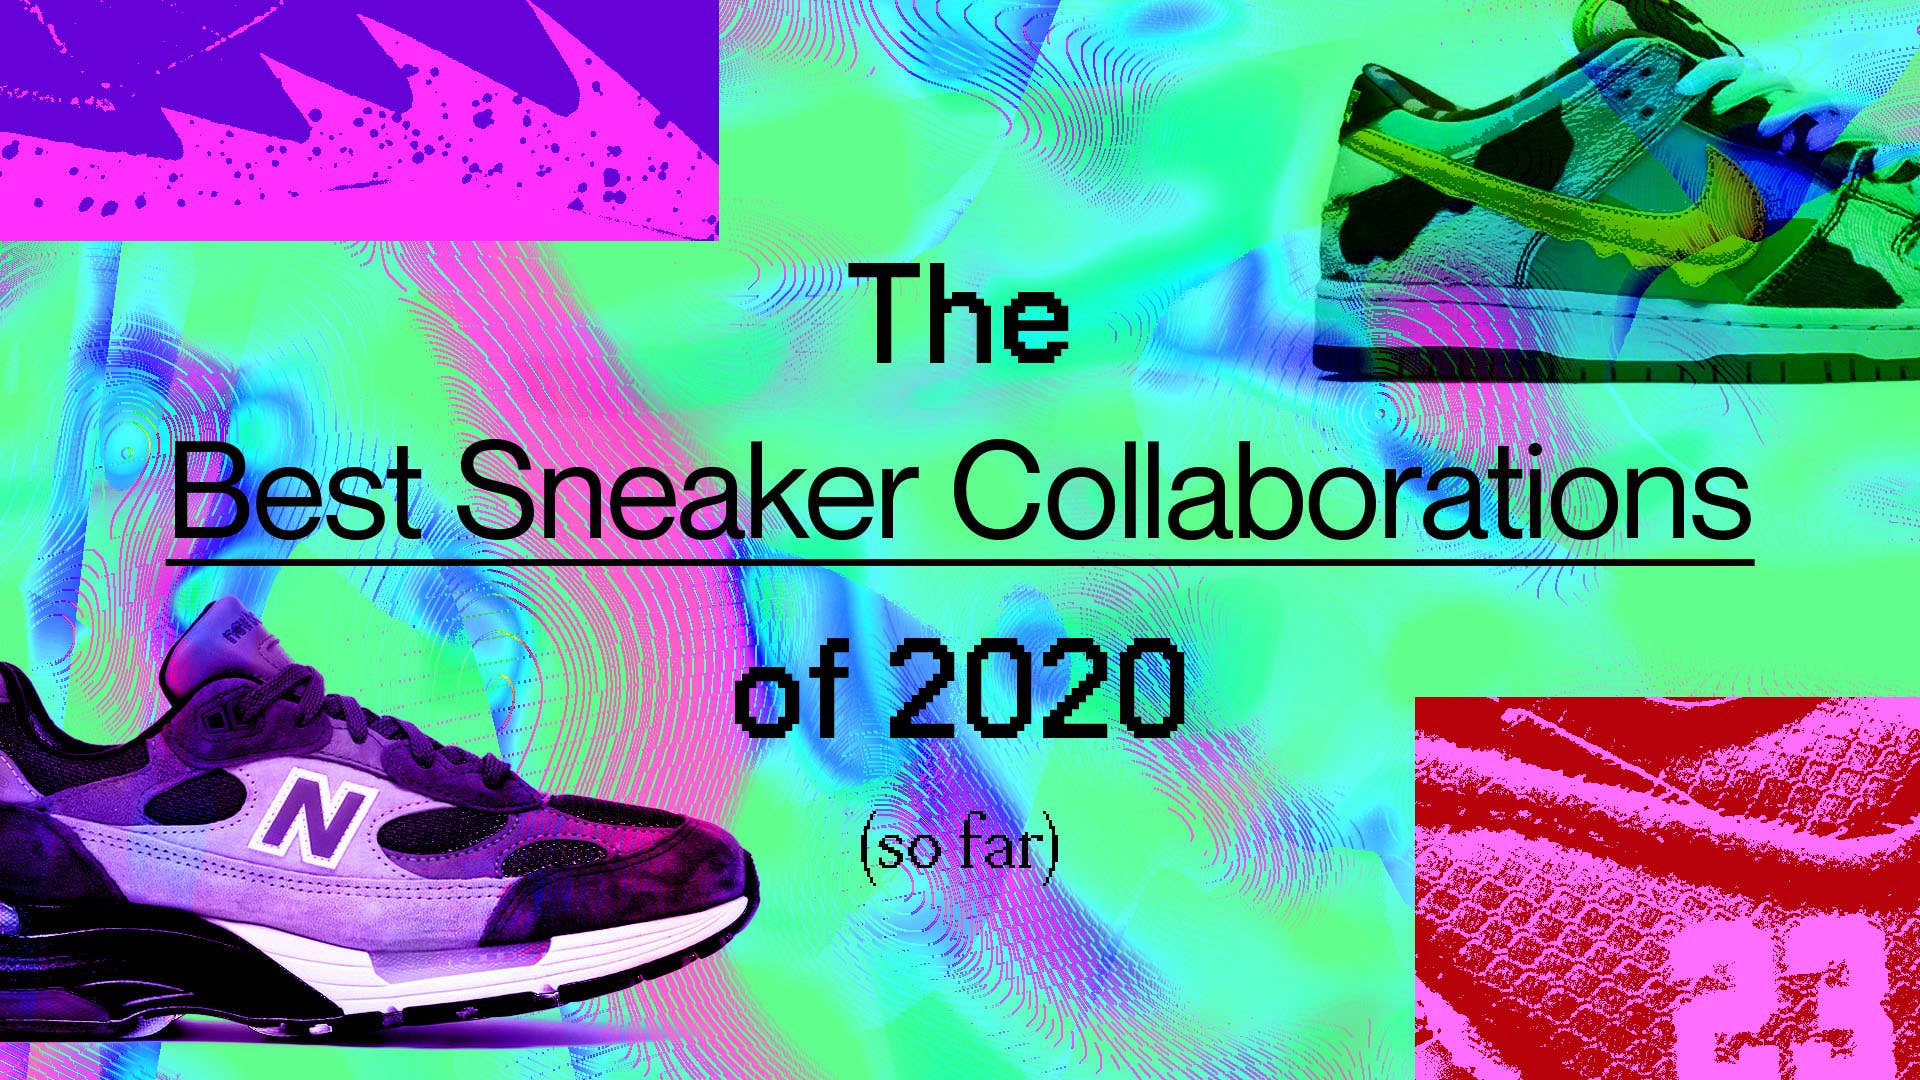 The best sneaker collaborations with the coolest artists - All City Canvas